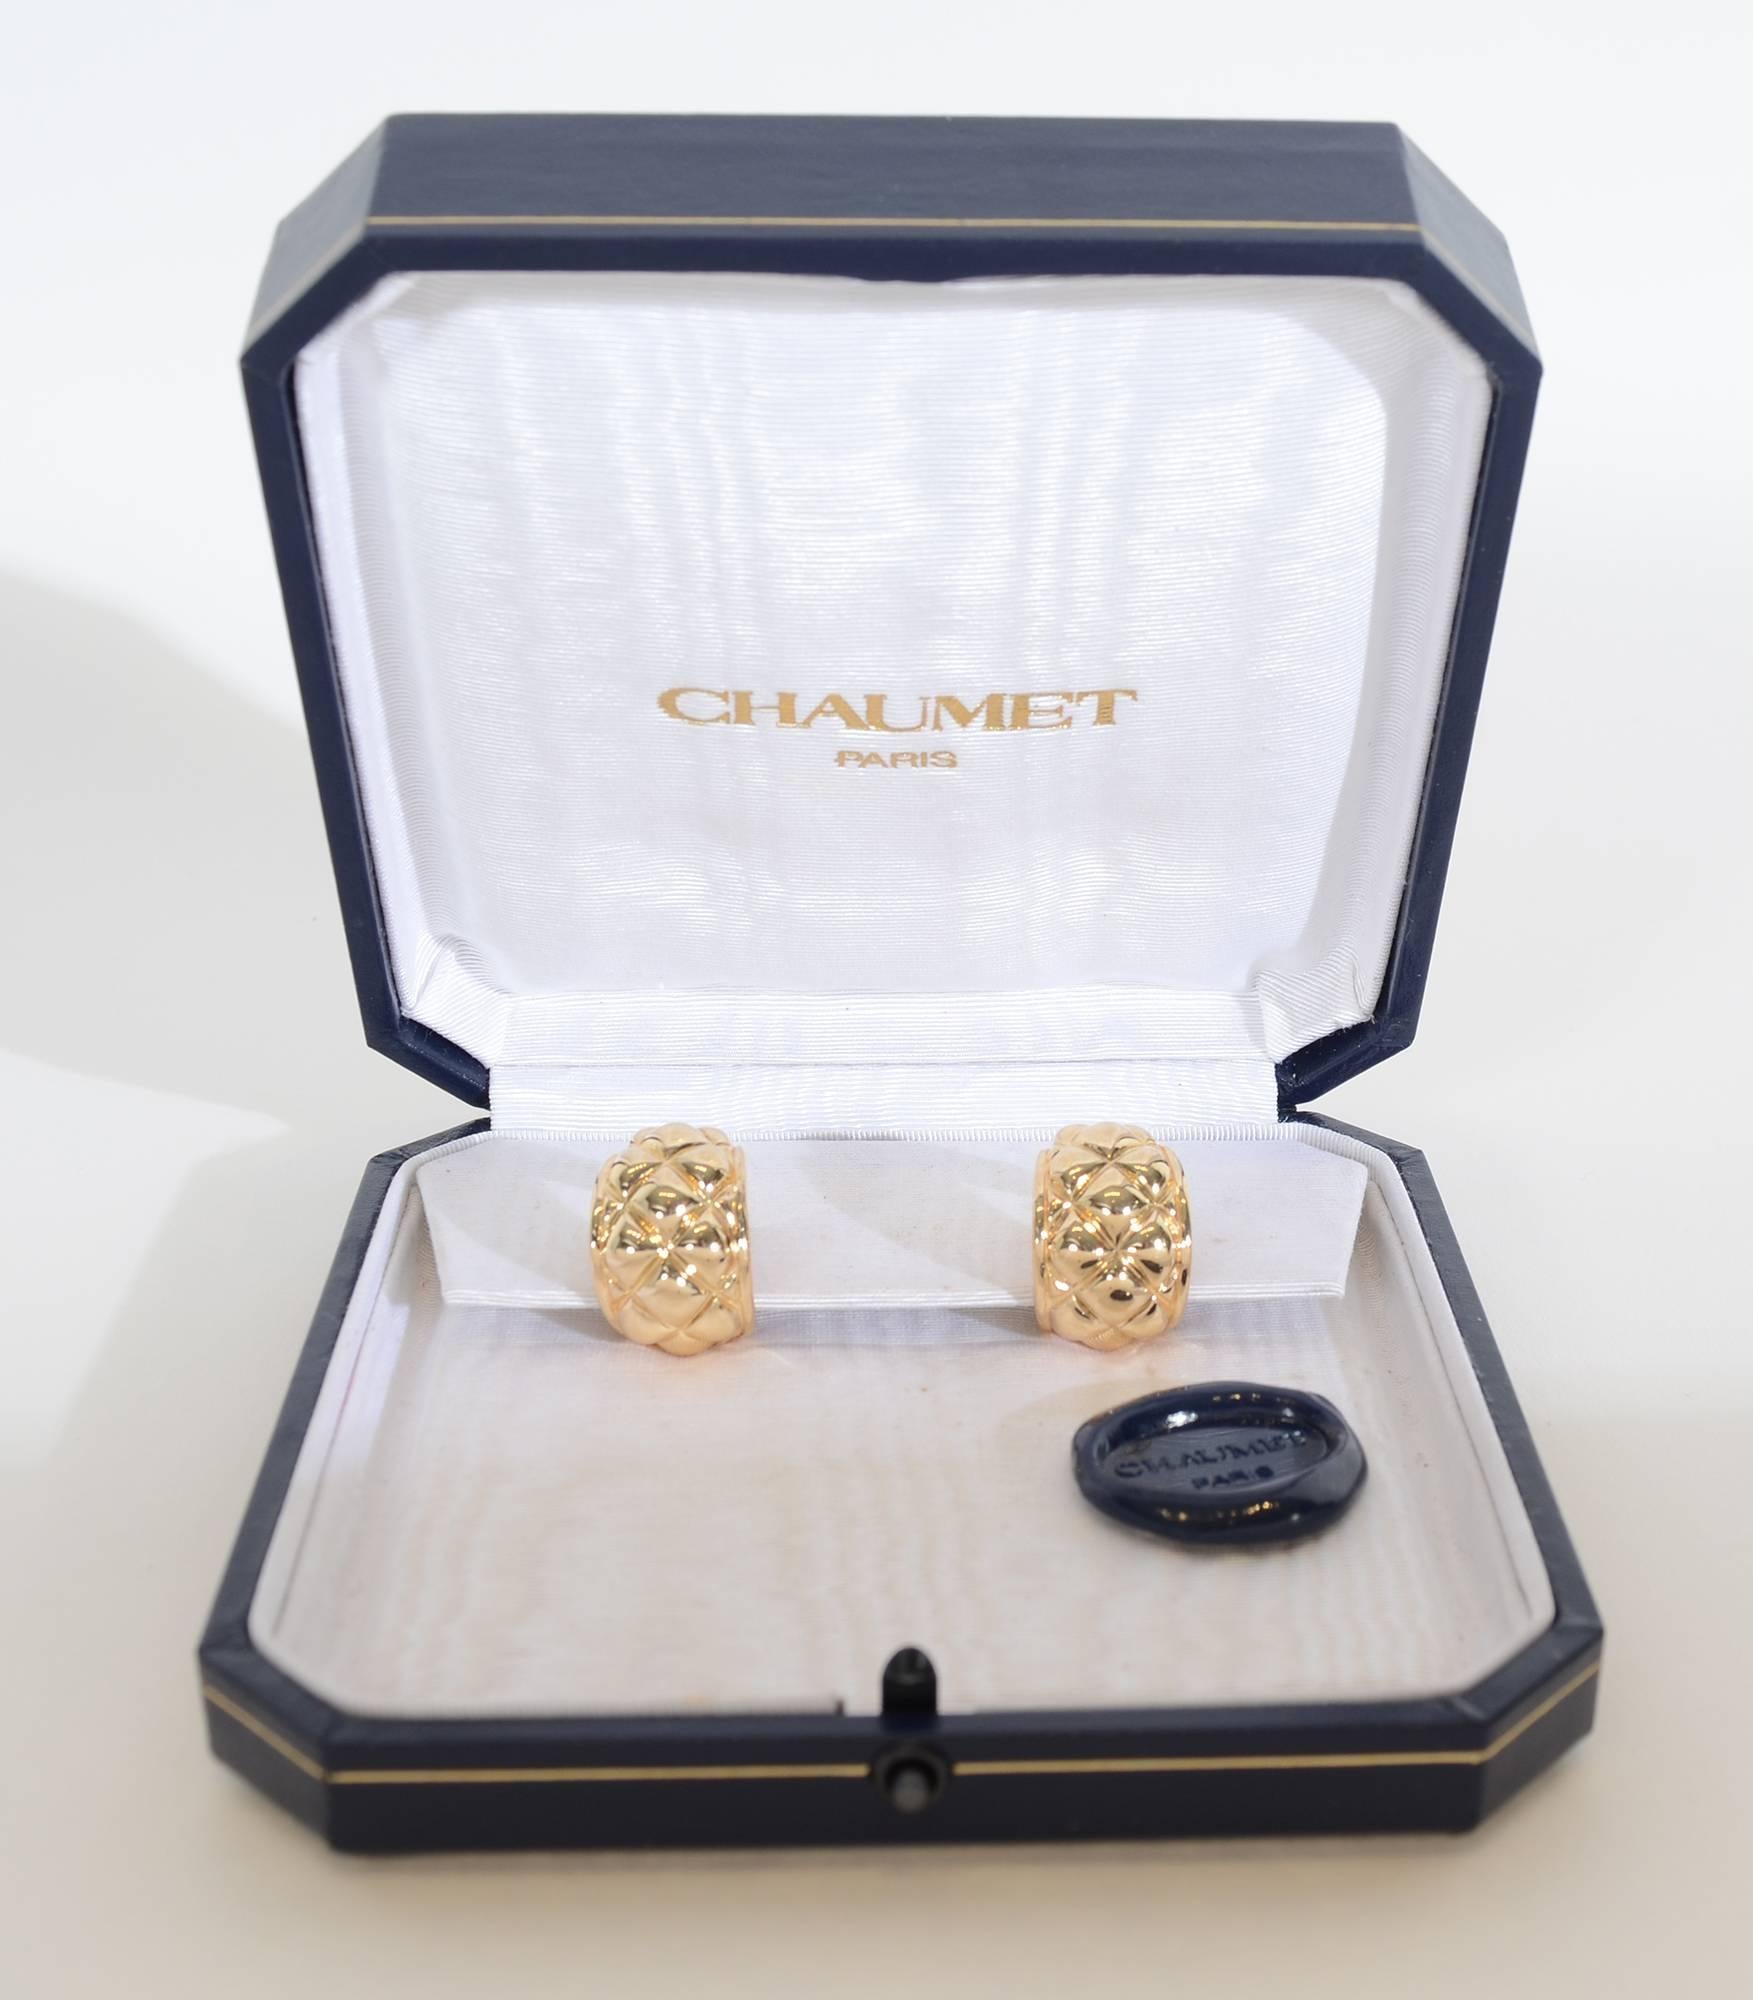 Chaumet hoop earrings with a three dimensional design of quilted diamonds.
They measure 5/8